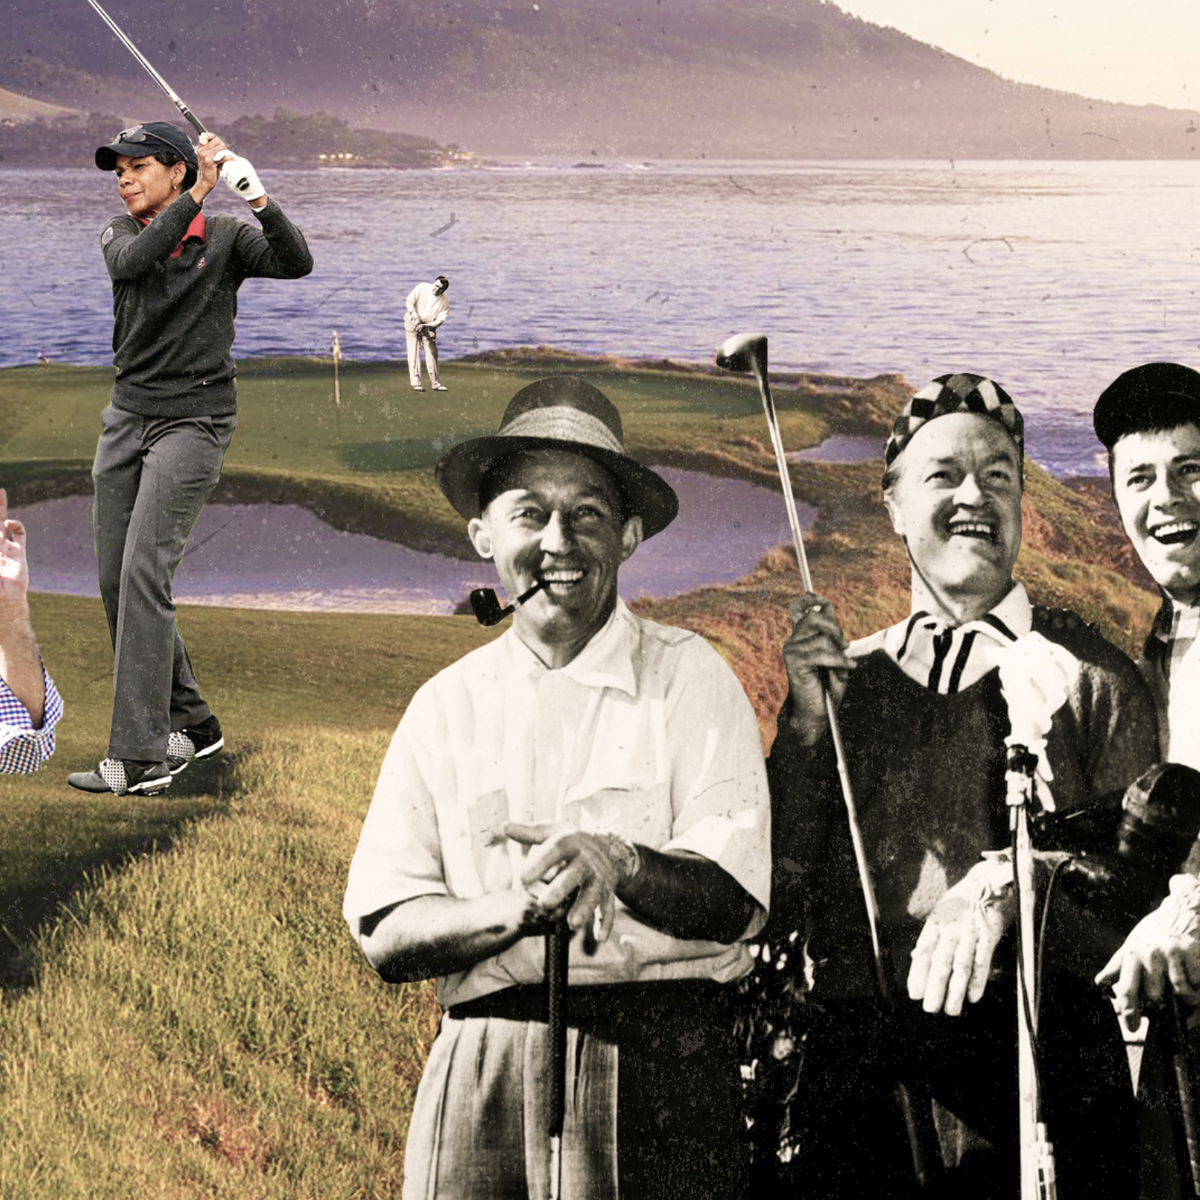 AT&T Pebble Beach Pro-Am: For pro athletes, pandemic created more interest  in golf